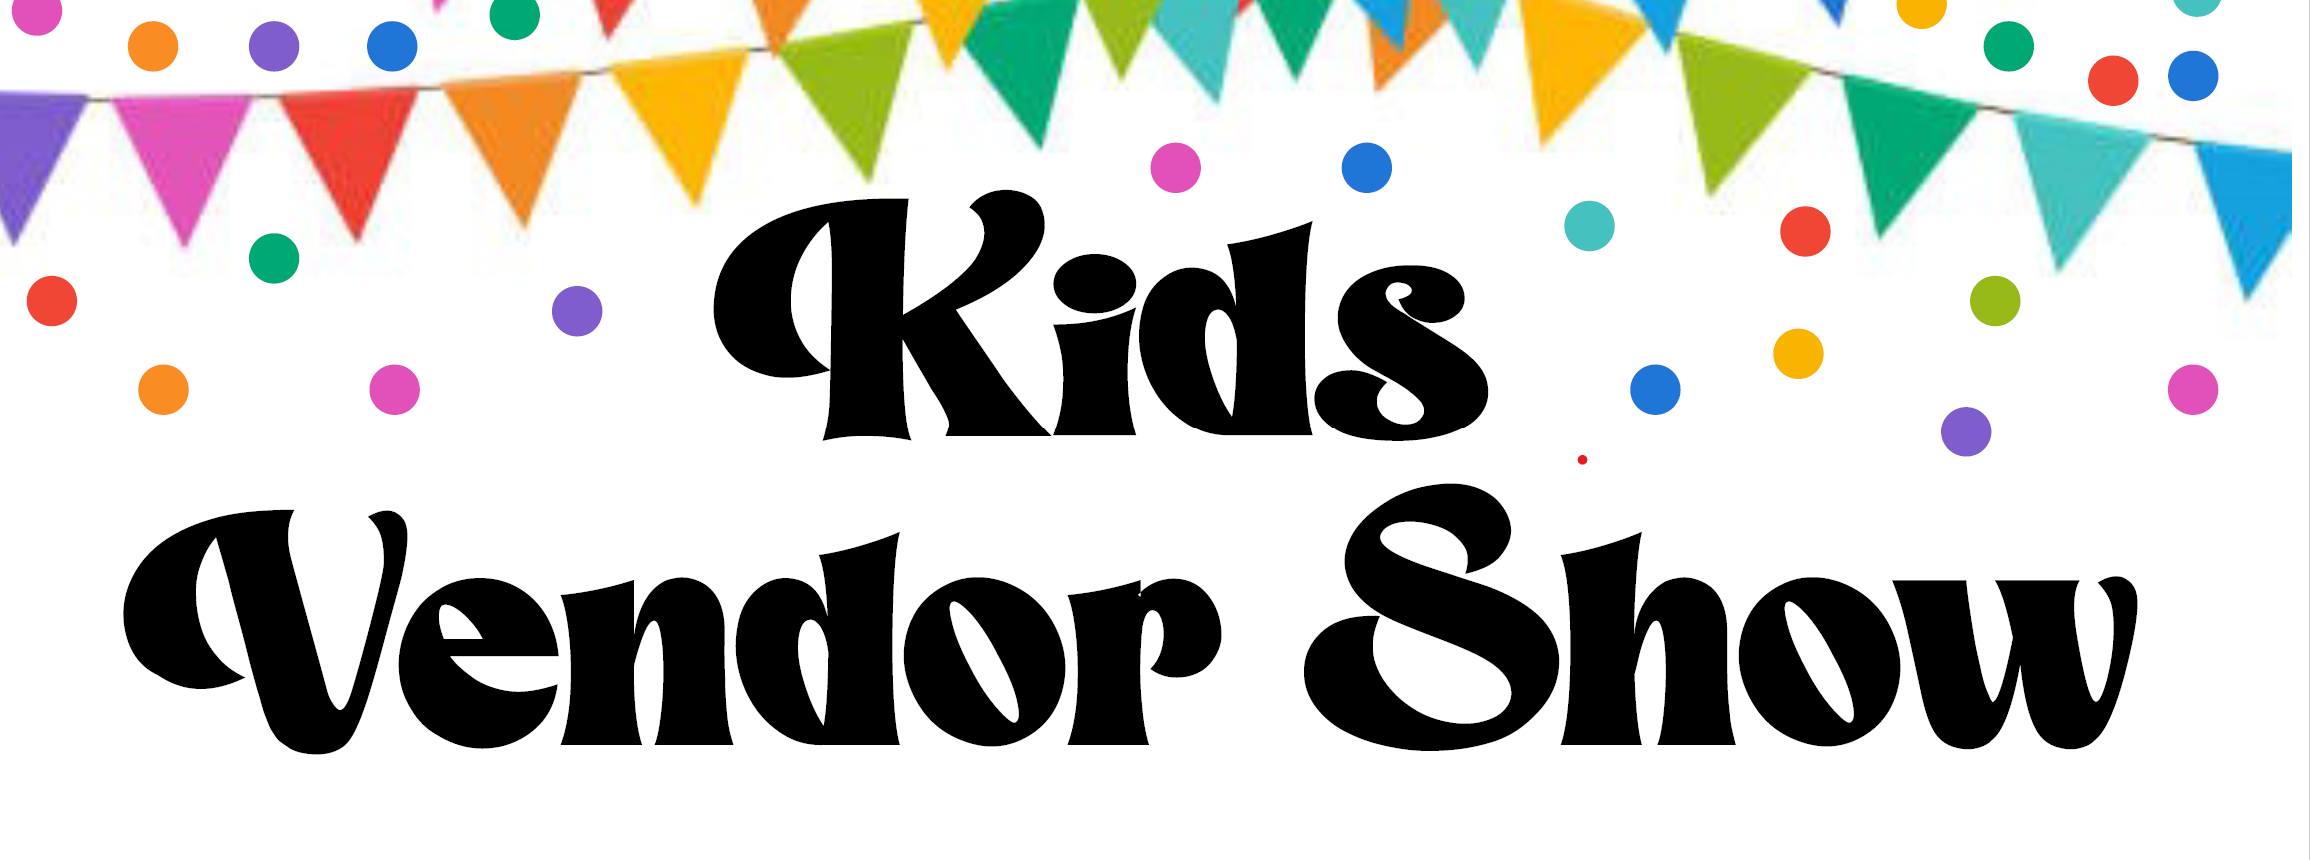 Kids Vendor Show Photo - Click Here to See